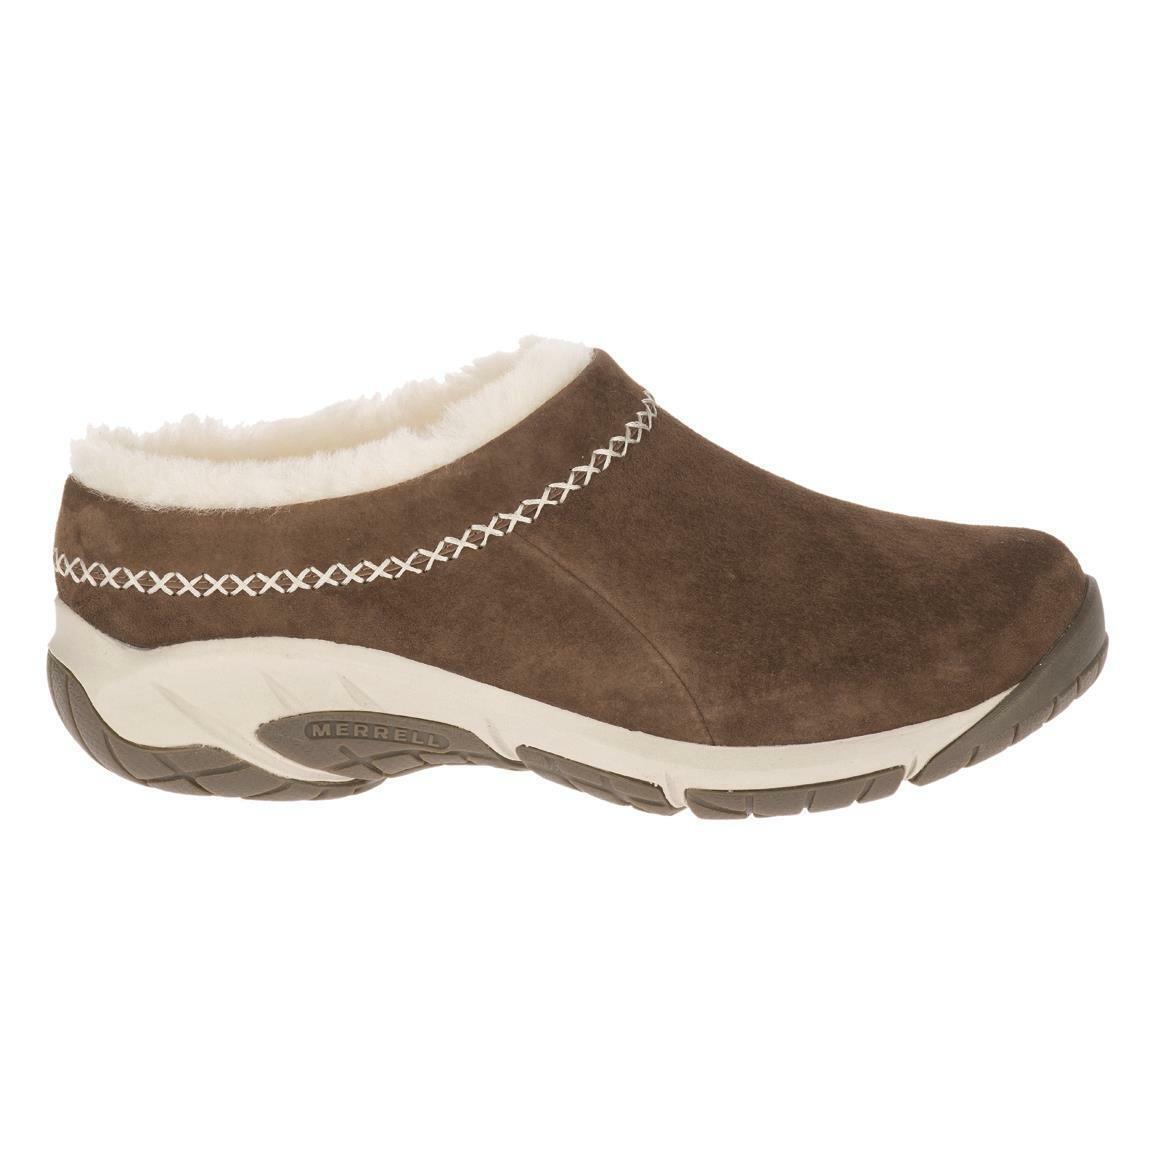 Merrell Encore Ice 4 Stone Brown Shearling Suede Slip On Shoes Women 10